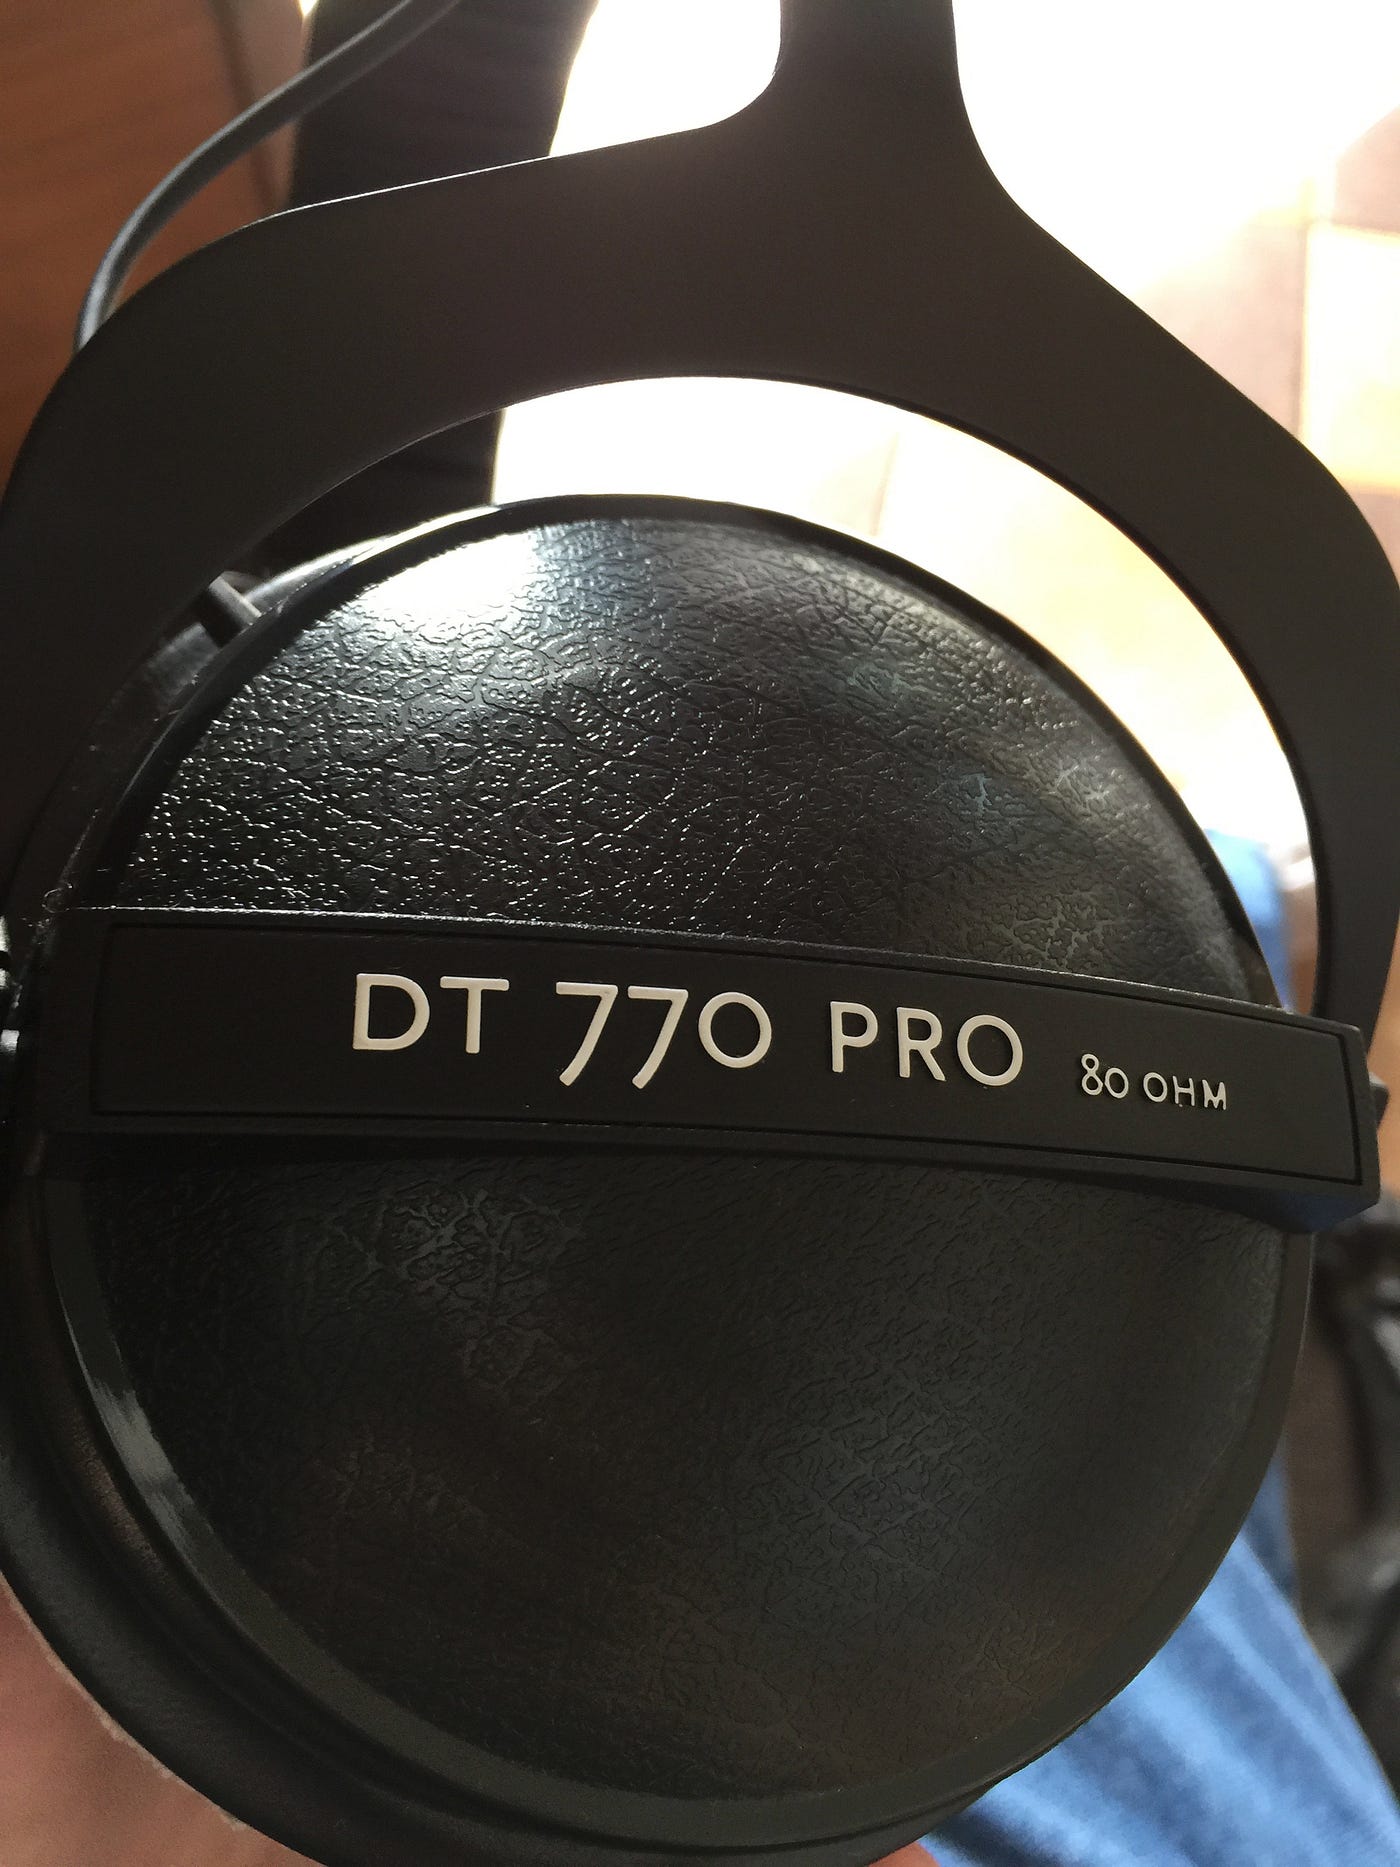 Needed some closed-backs, so I picked up the DT770 PRO 80 ohms